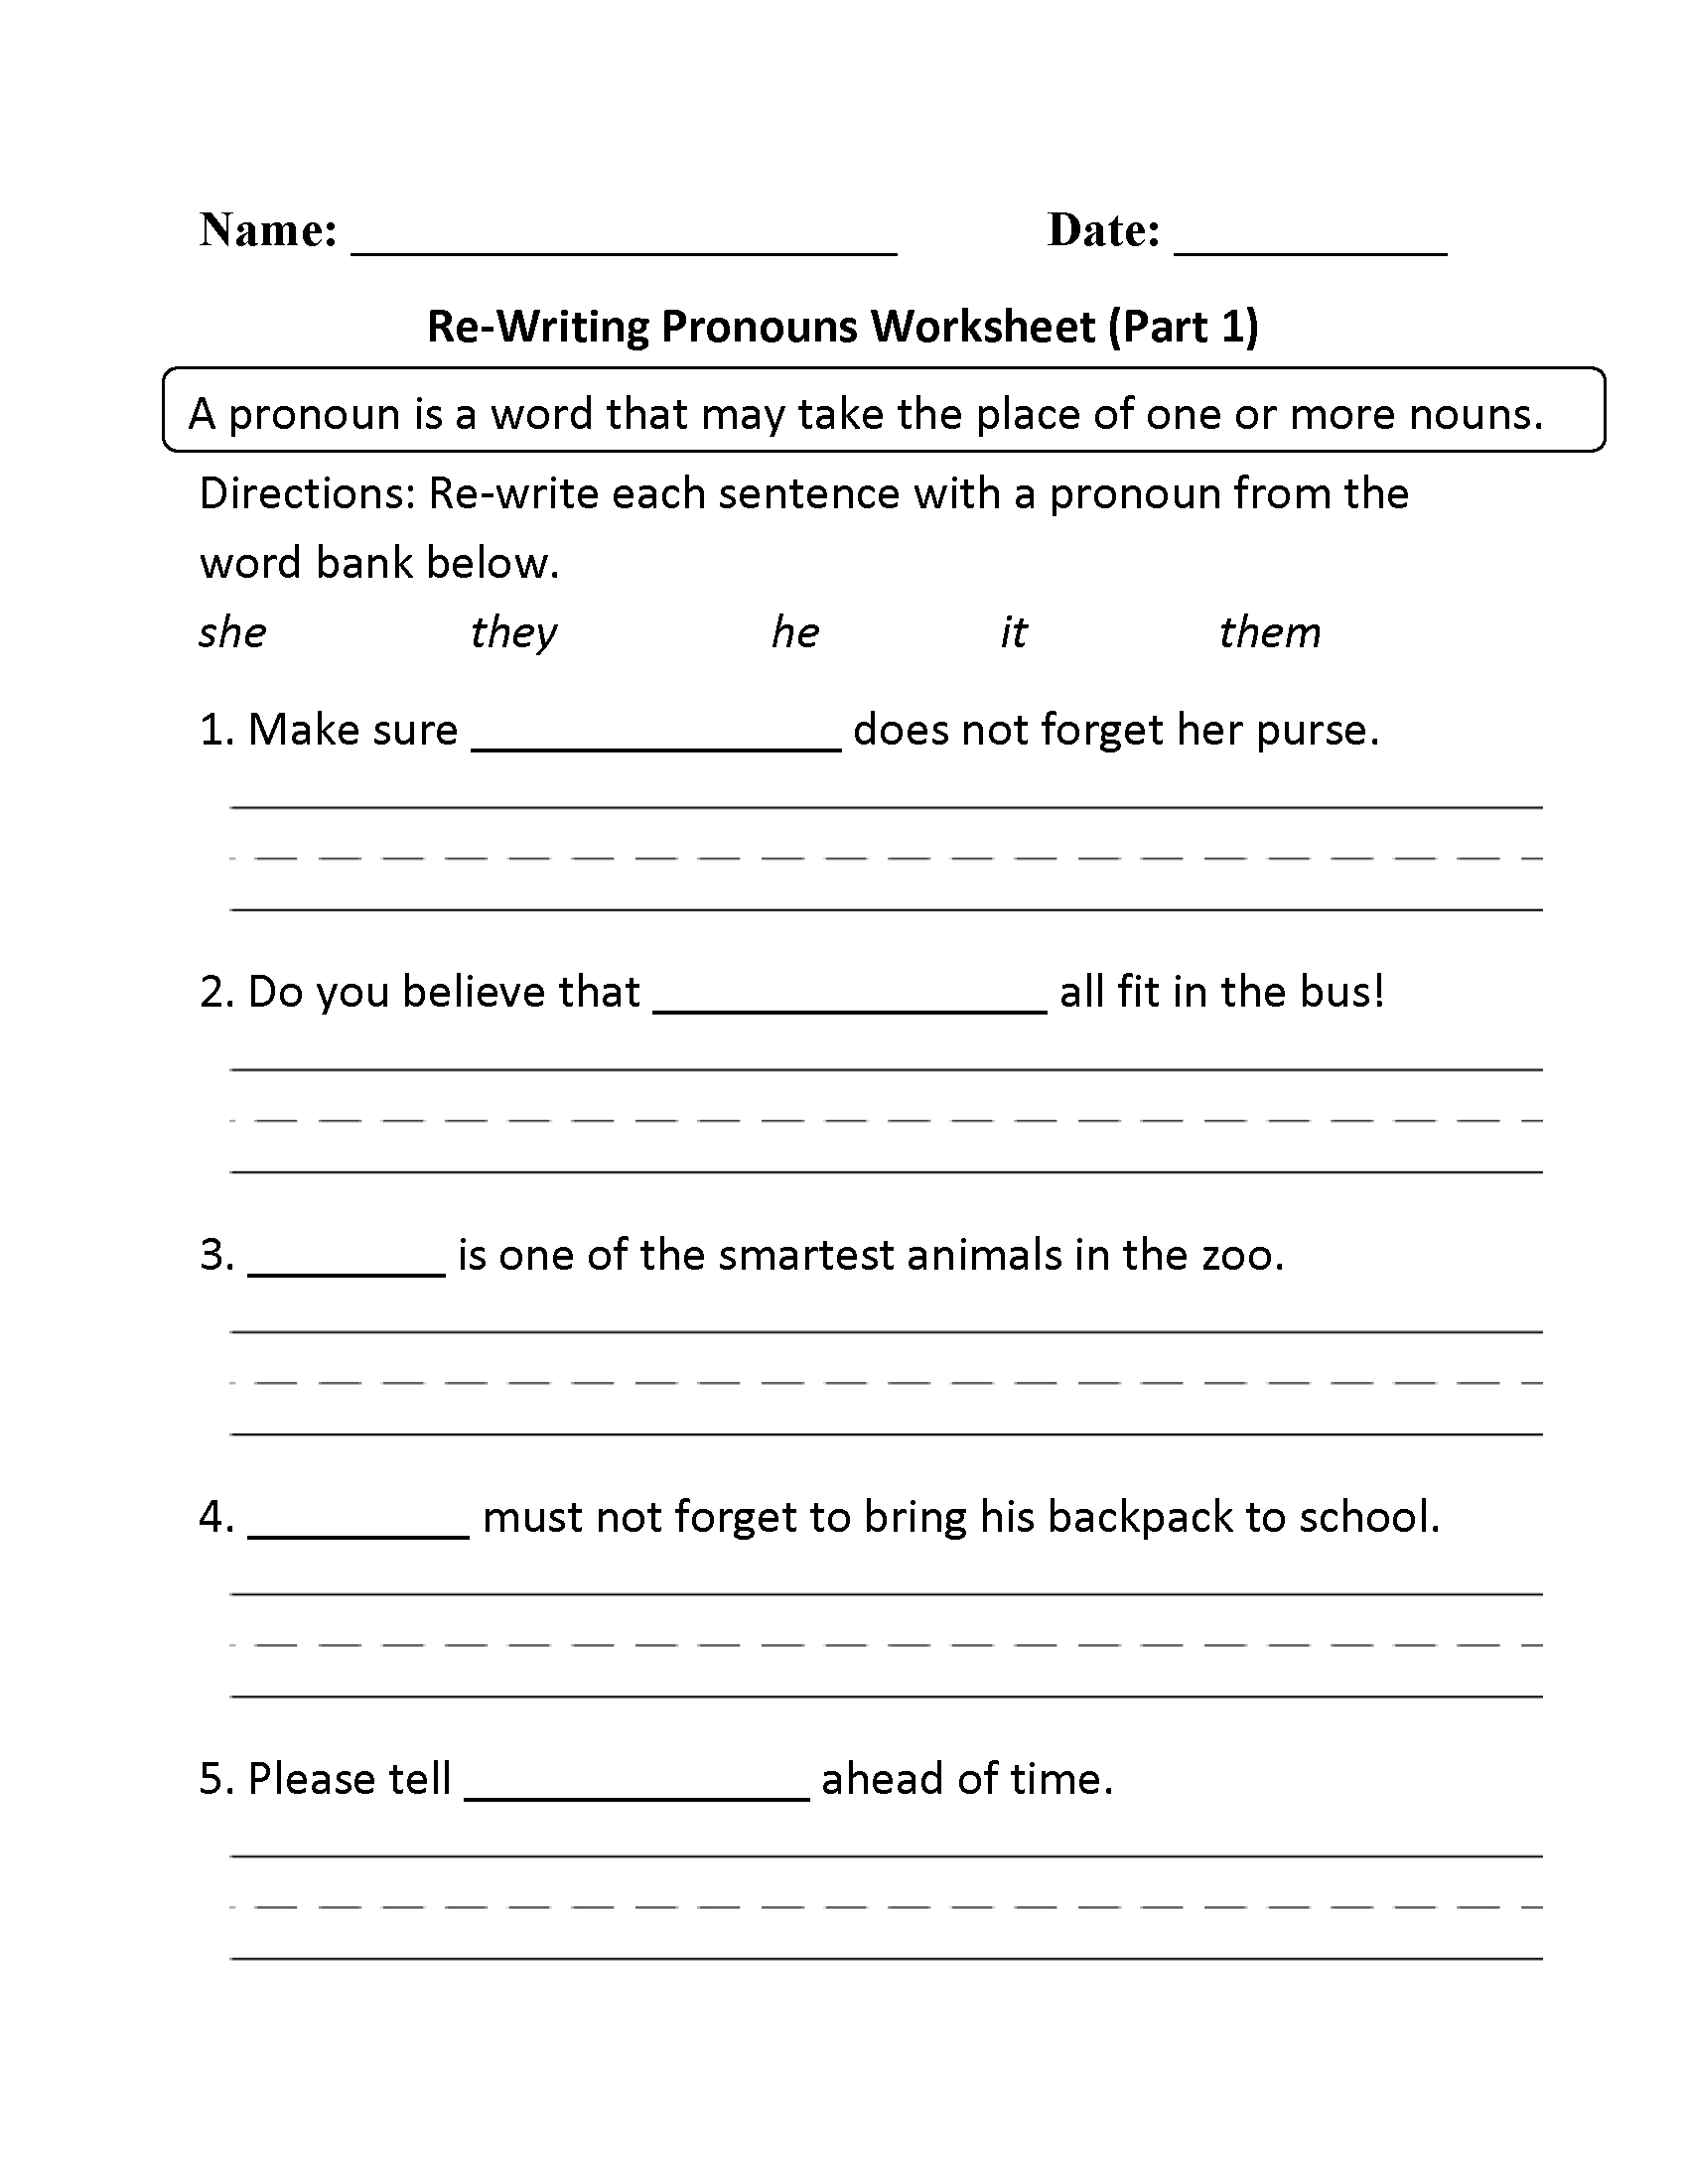 worksheet-for-pronoun-reference-agreement